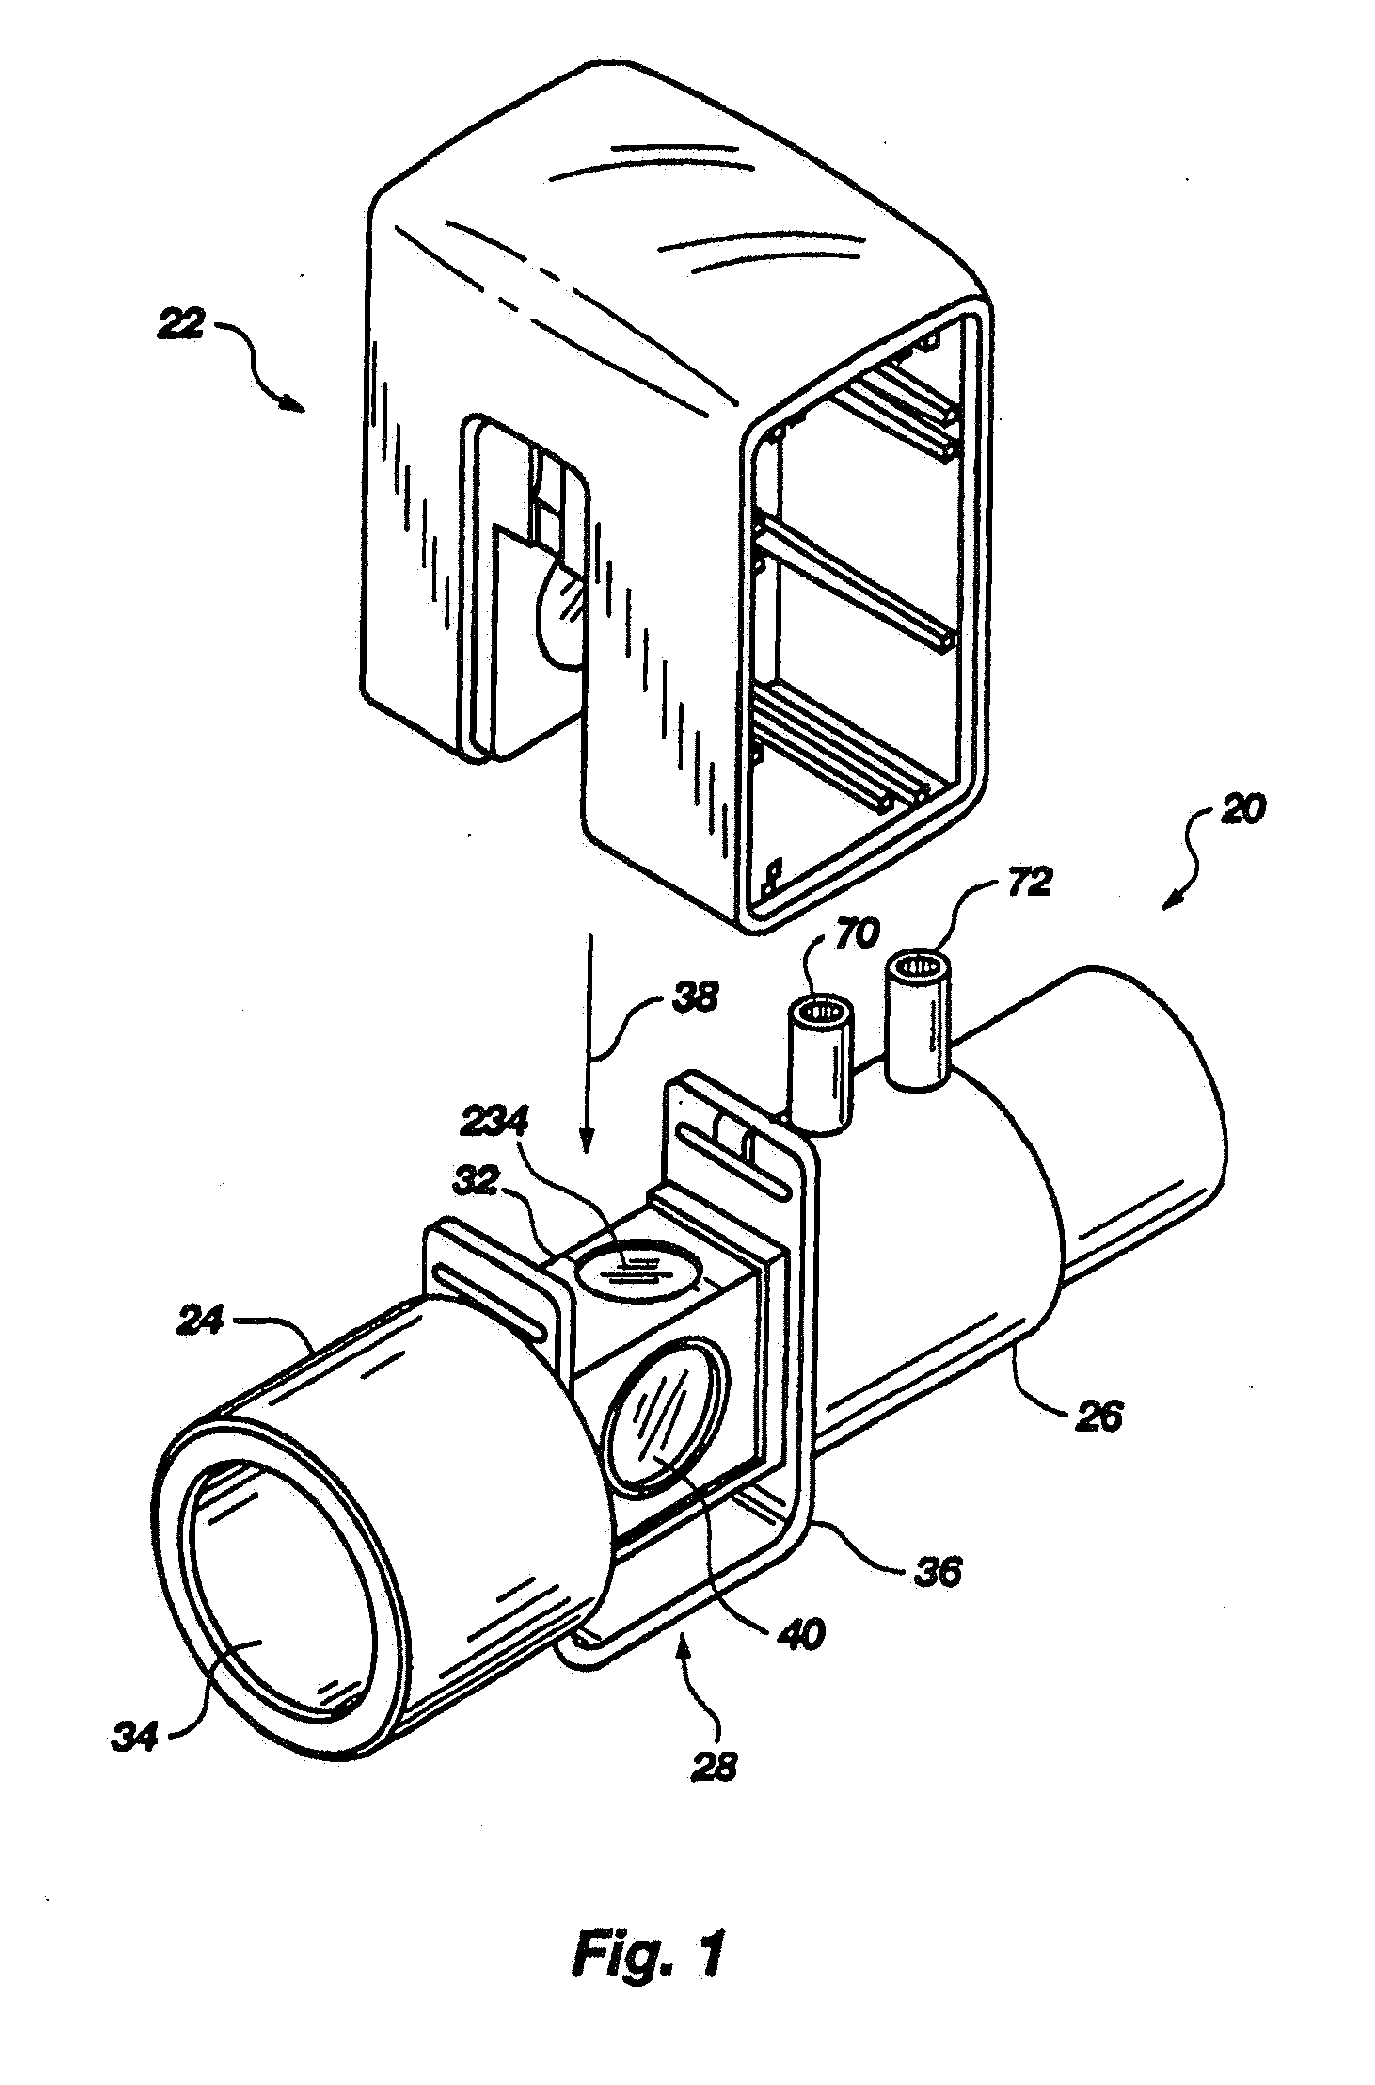 Metabolic measure system including a multiple function airway adapter